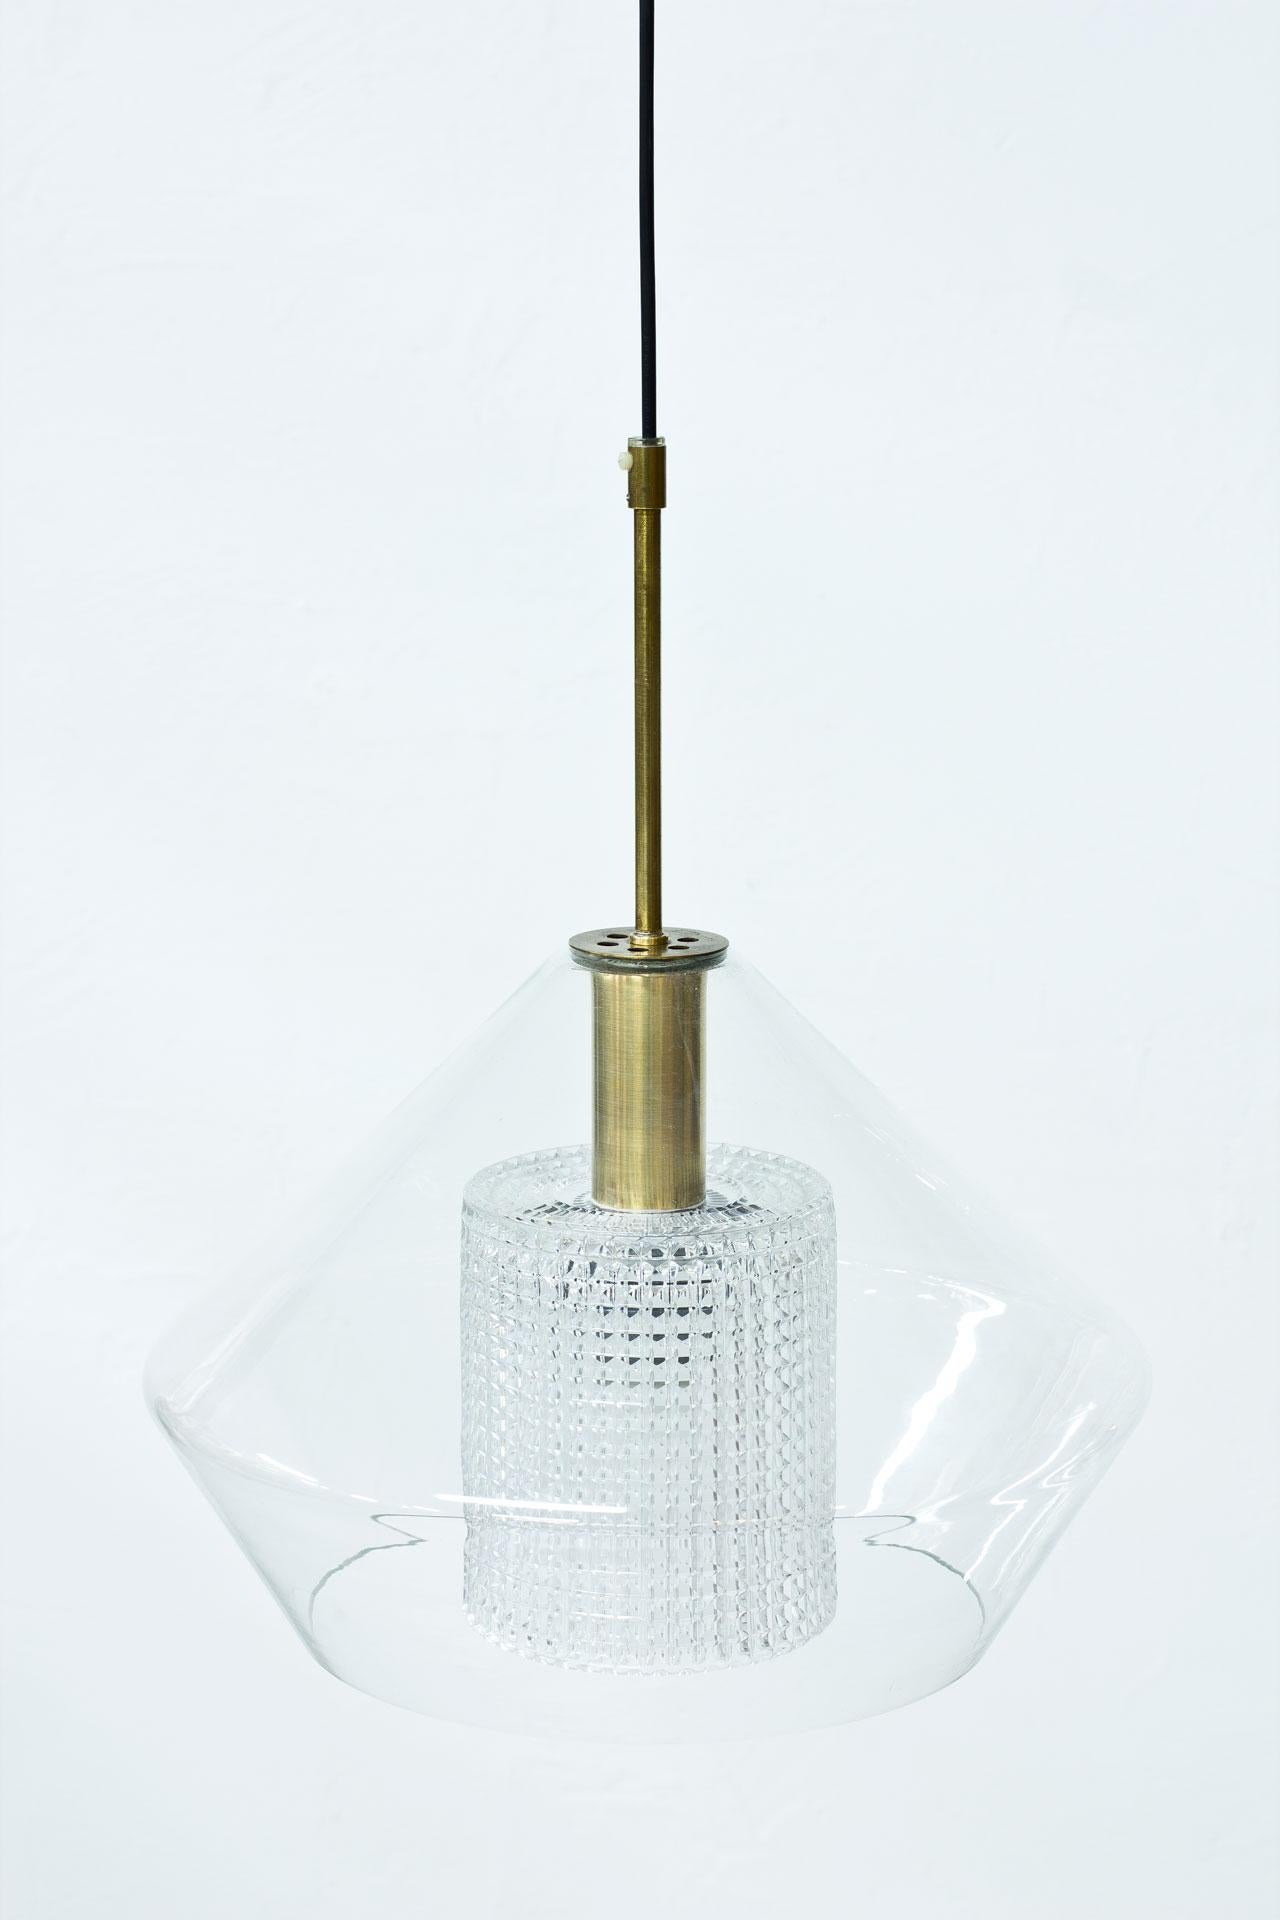 Pendant lamp designed by Carl Fagerlund for Swedish glass company Orrefors during the 1960s. Outer cup in clear glass with a cylindrical diffuser in clear pressed glass. Brass fittings.
New electricity.